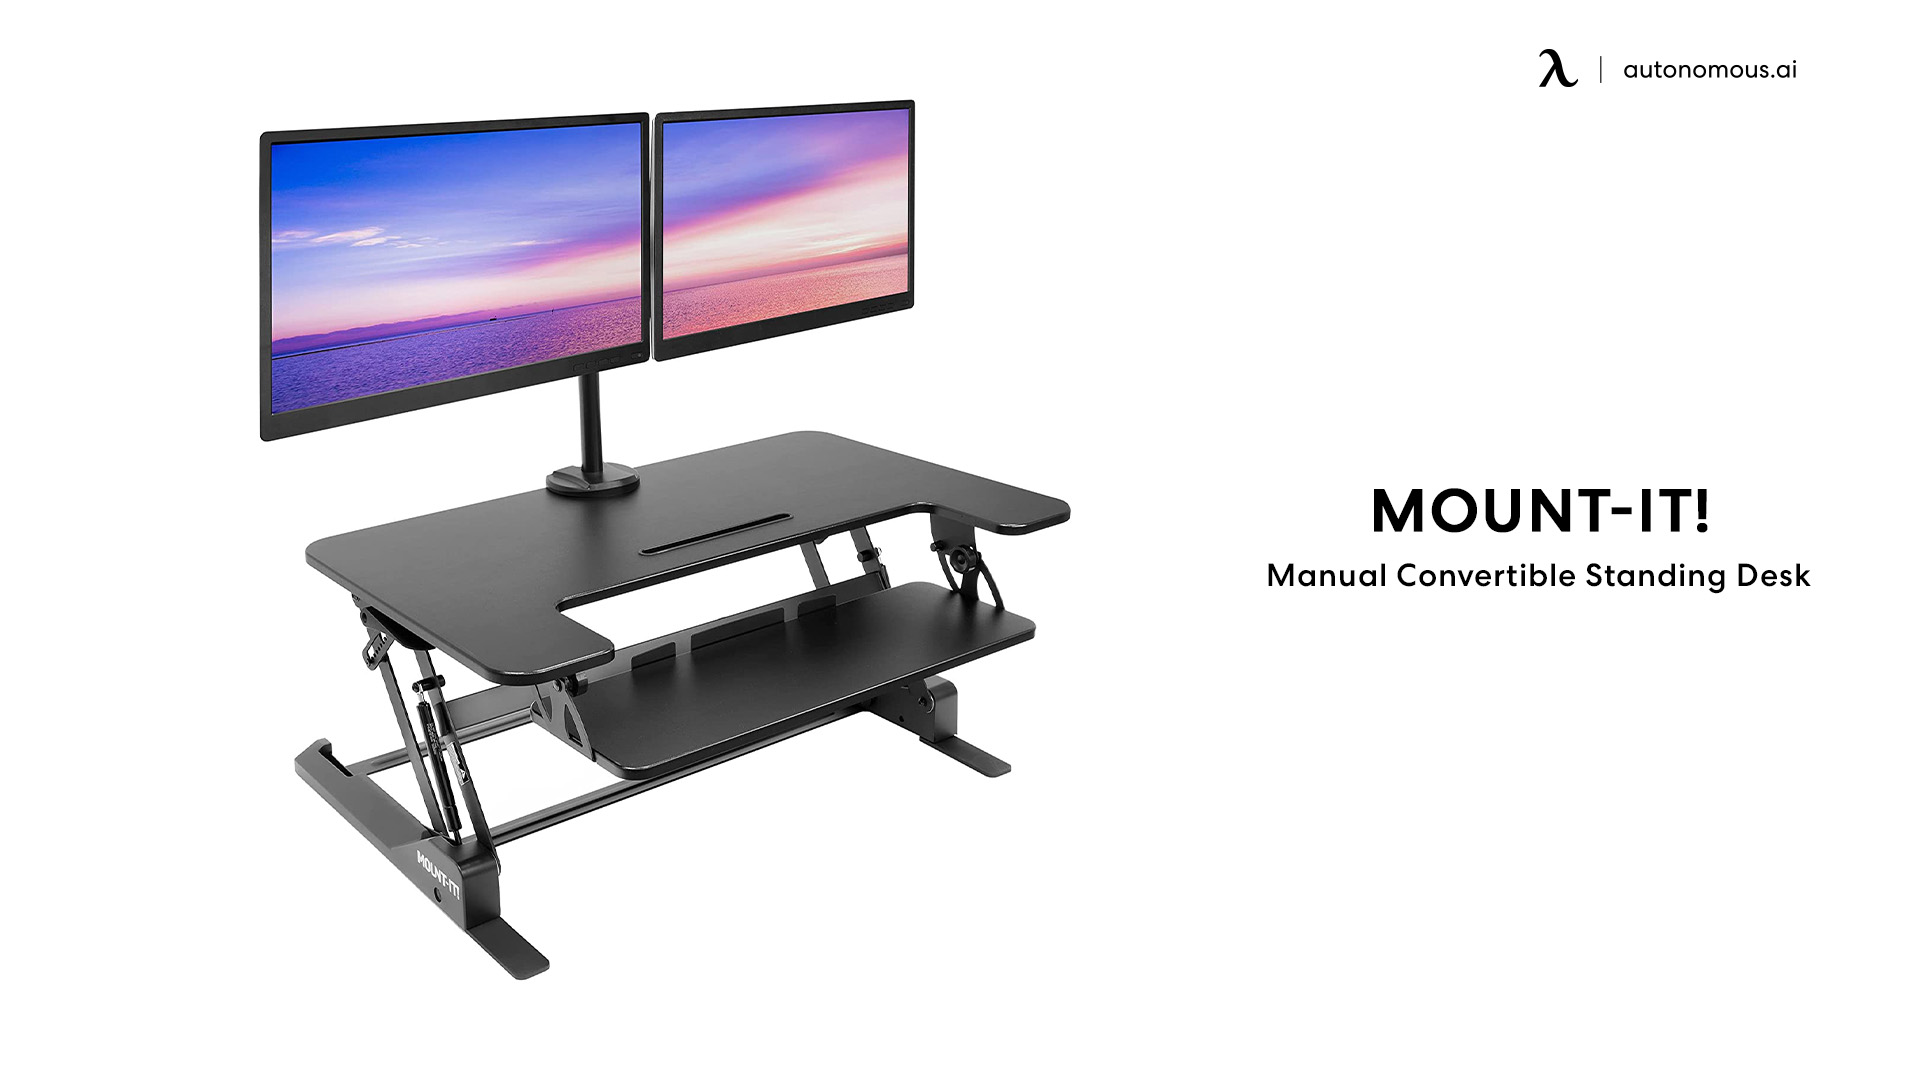 Standing Desk Converter by Mount-It! small home office desk